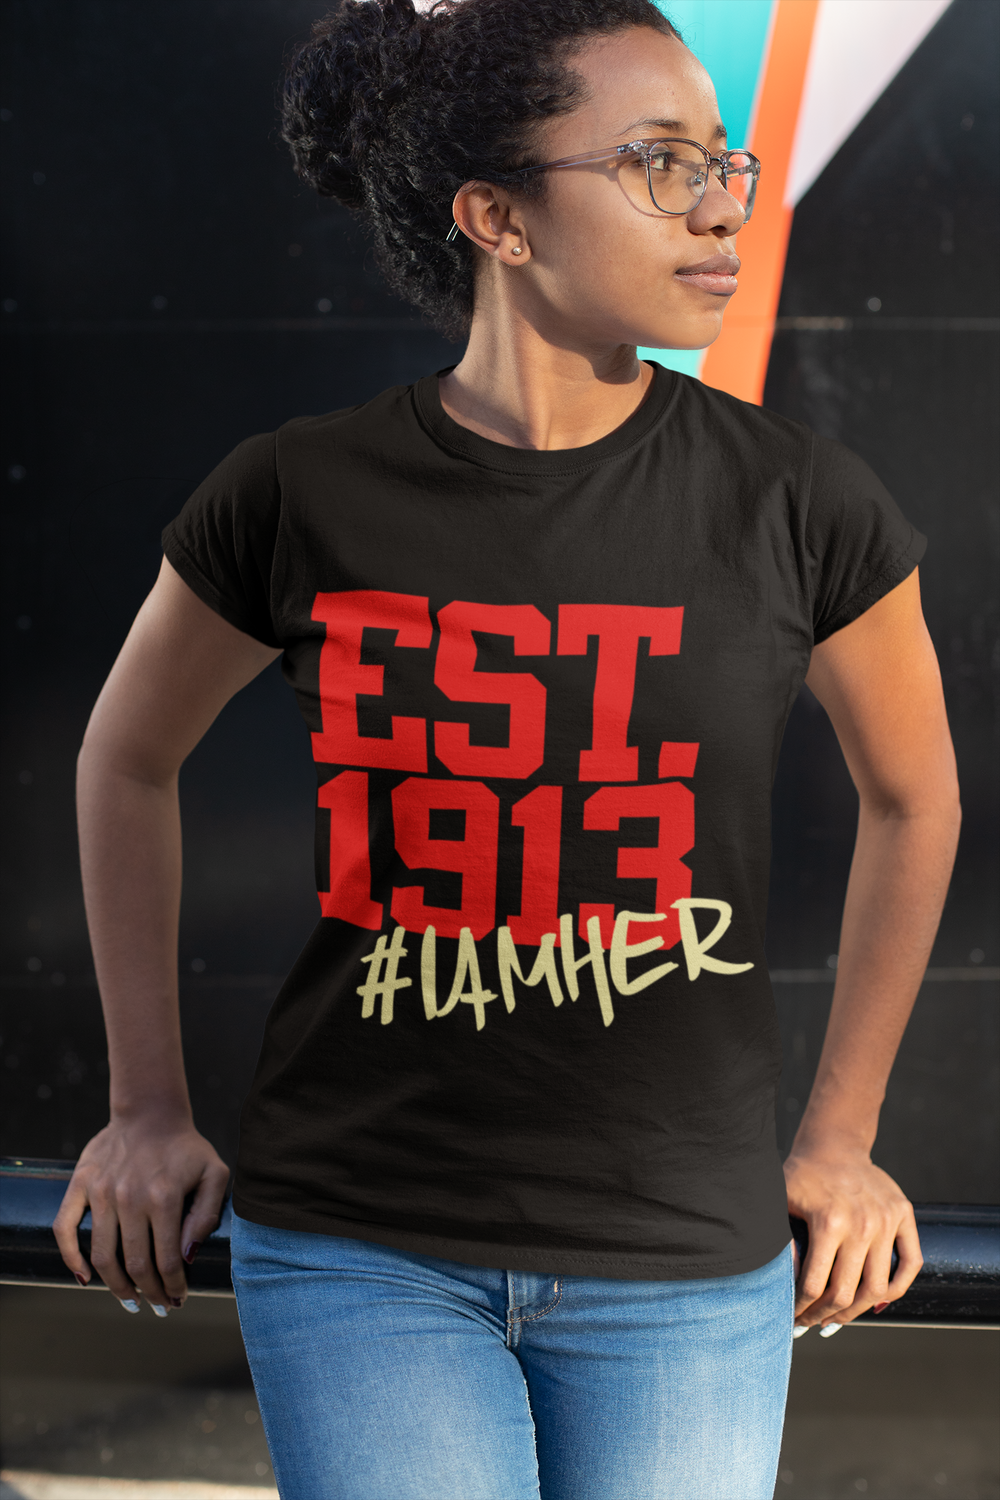 Delta Sigma Theta Inspired - EST. 1913 - Tees for Women - I AM HER Apparel